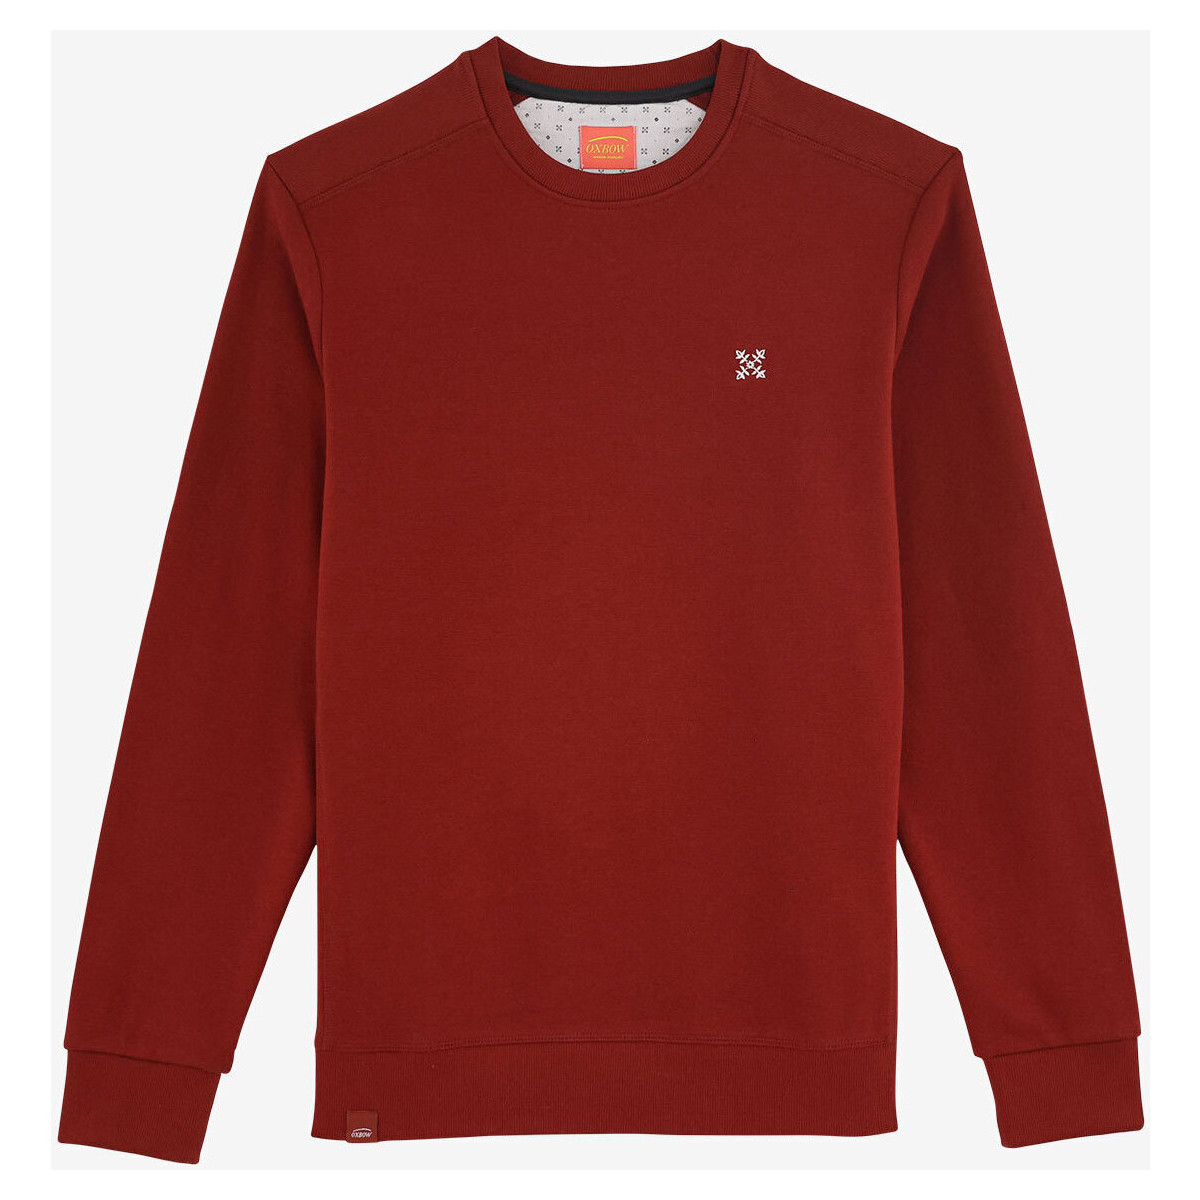 Oxbow Rouge Sweat col rond essentiel P2SOUET CllKc6xc